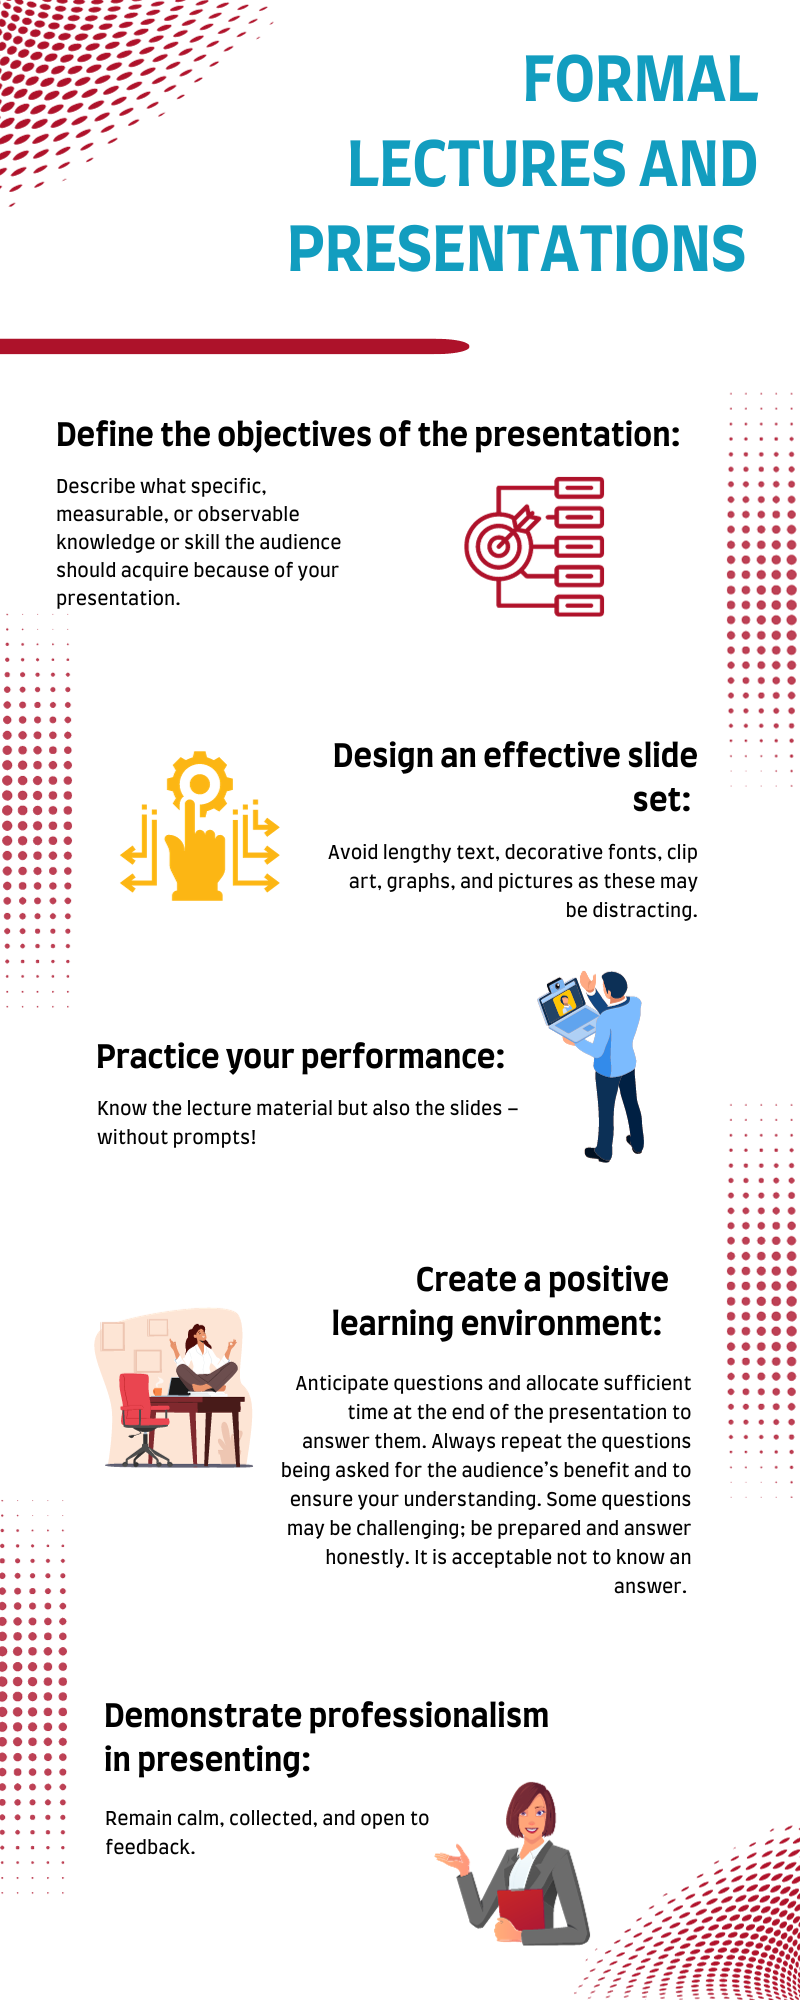 Infographic with steps for formal lectures and presentations